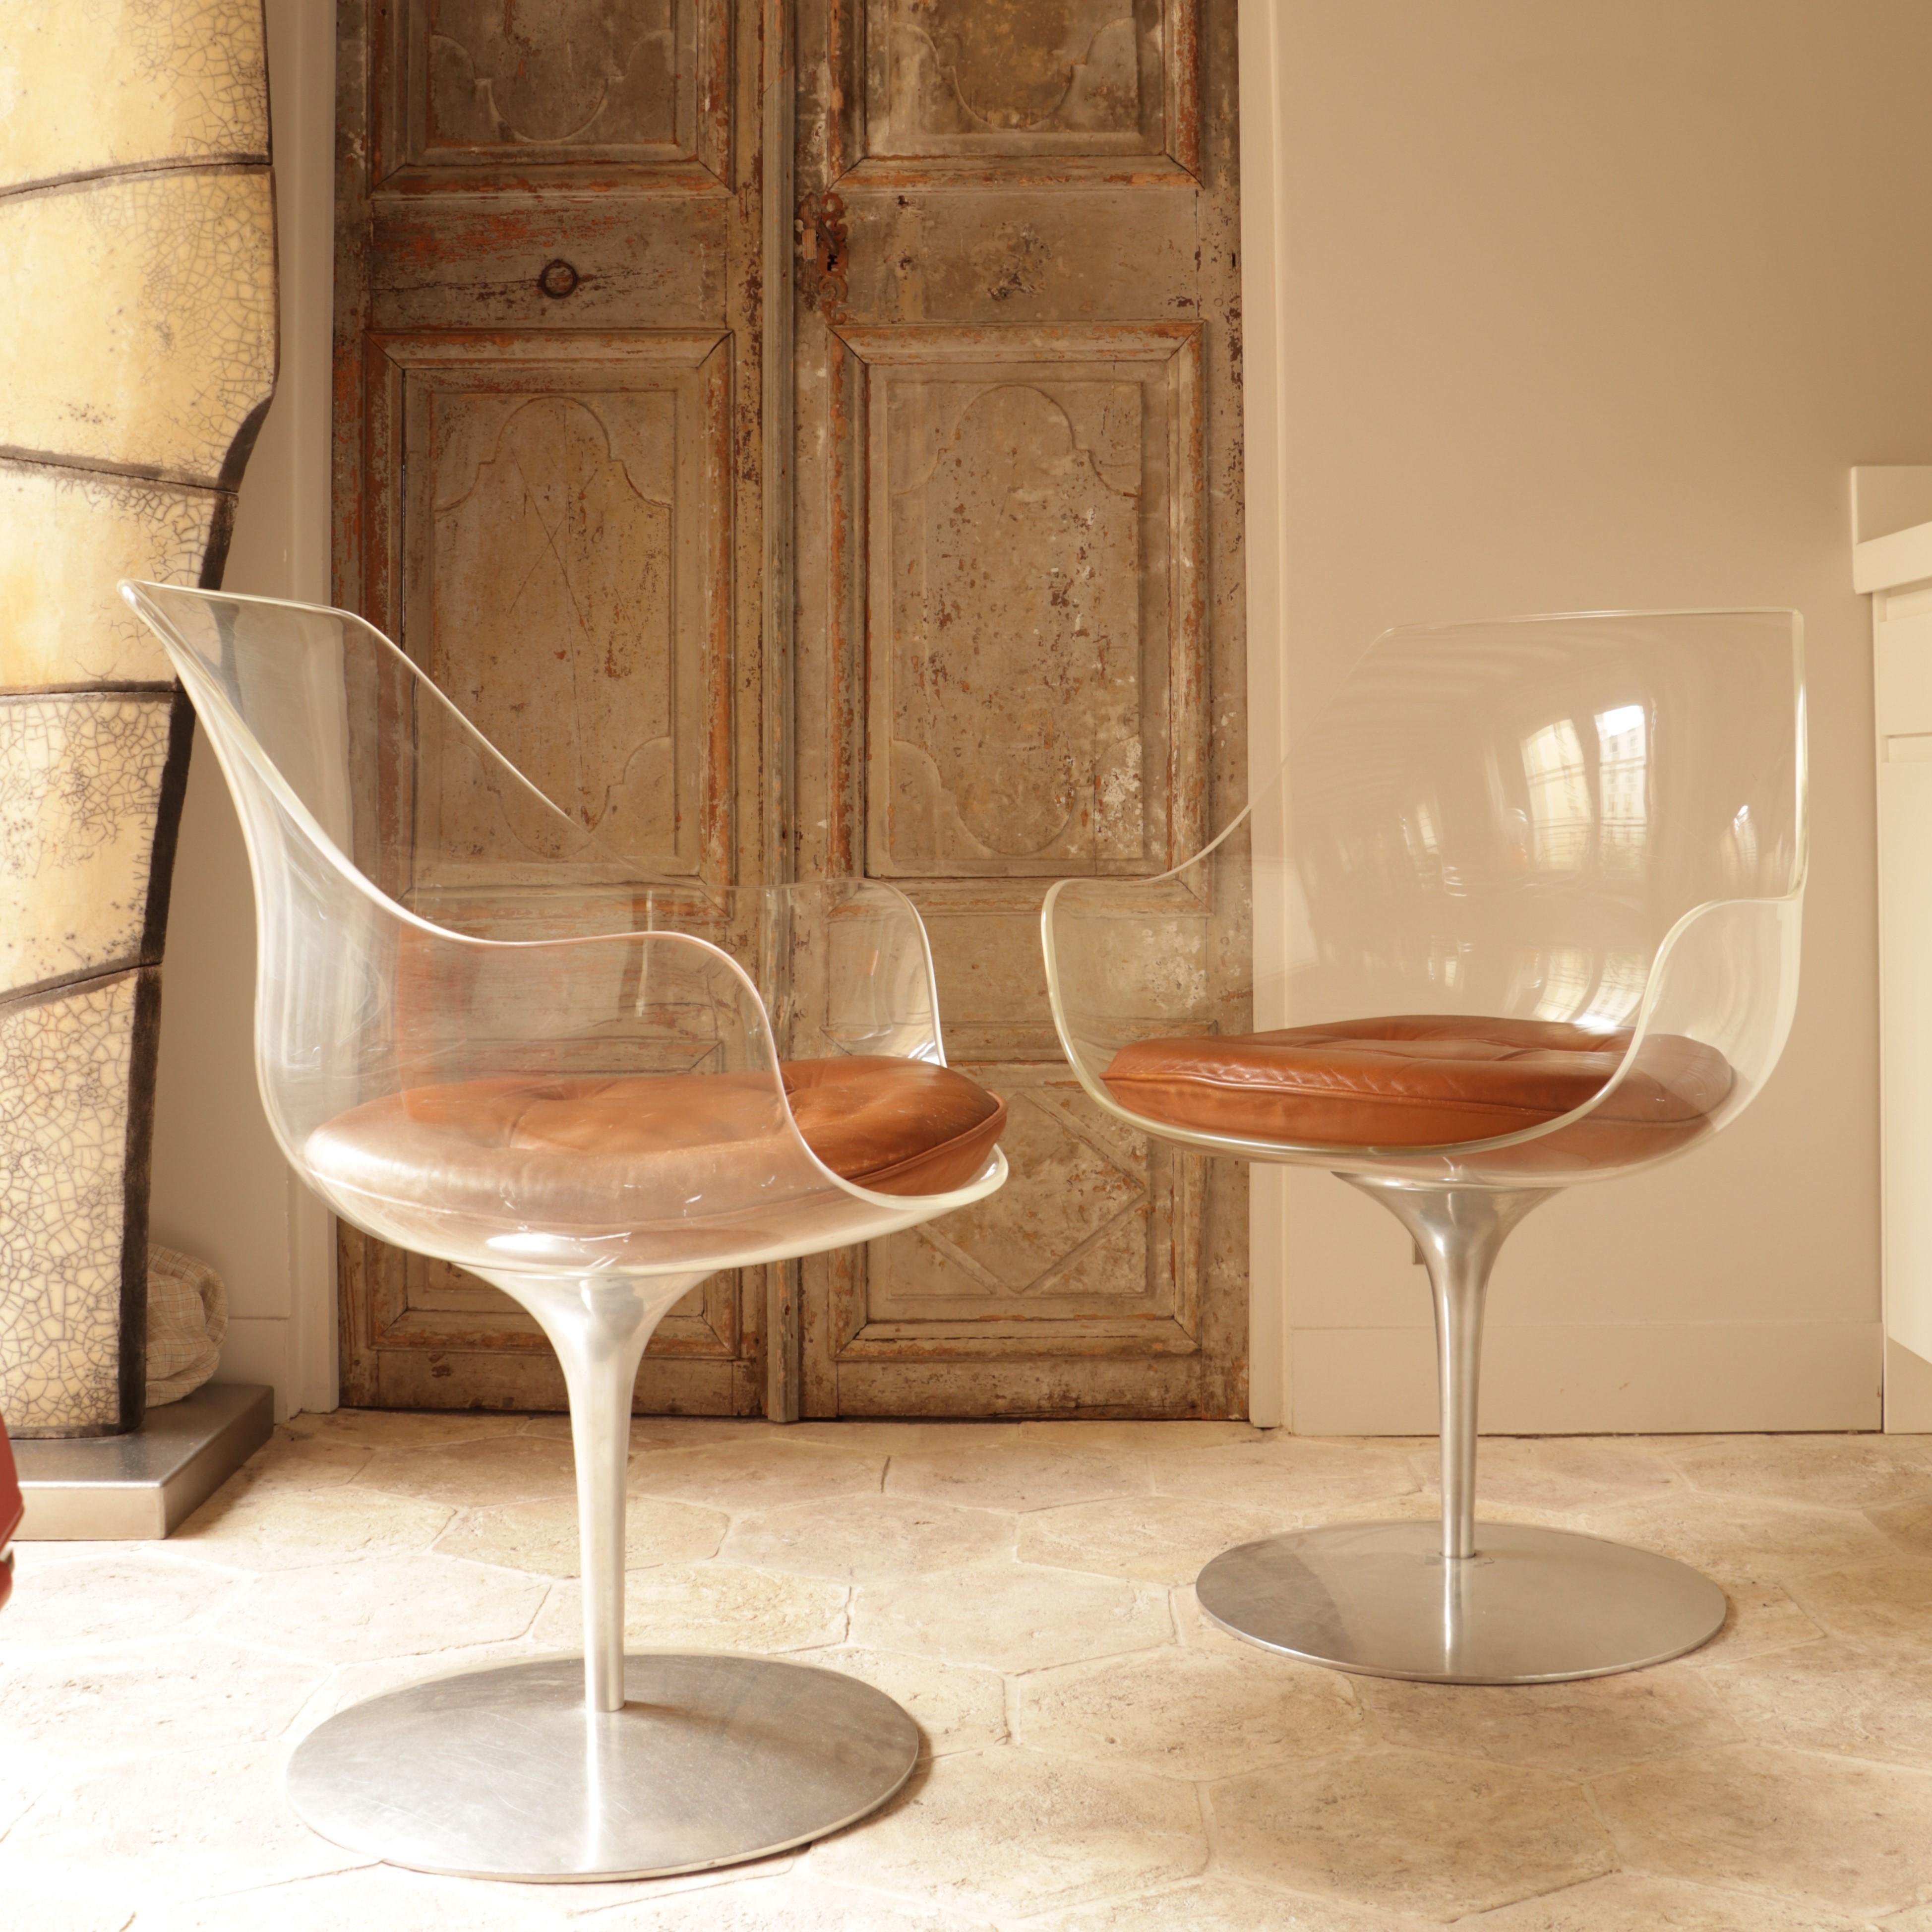 These two champagne chairs are made of plexiglass and steel and have brown leather cushions.
They were made by Estelle and Erwin Laverne in the 1960s.
Erwine Laverne studied in the United States and then in Europe from 1928. In 1934, he met